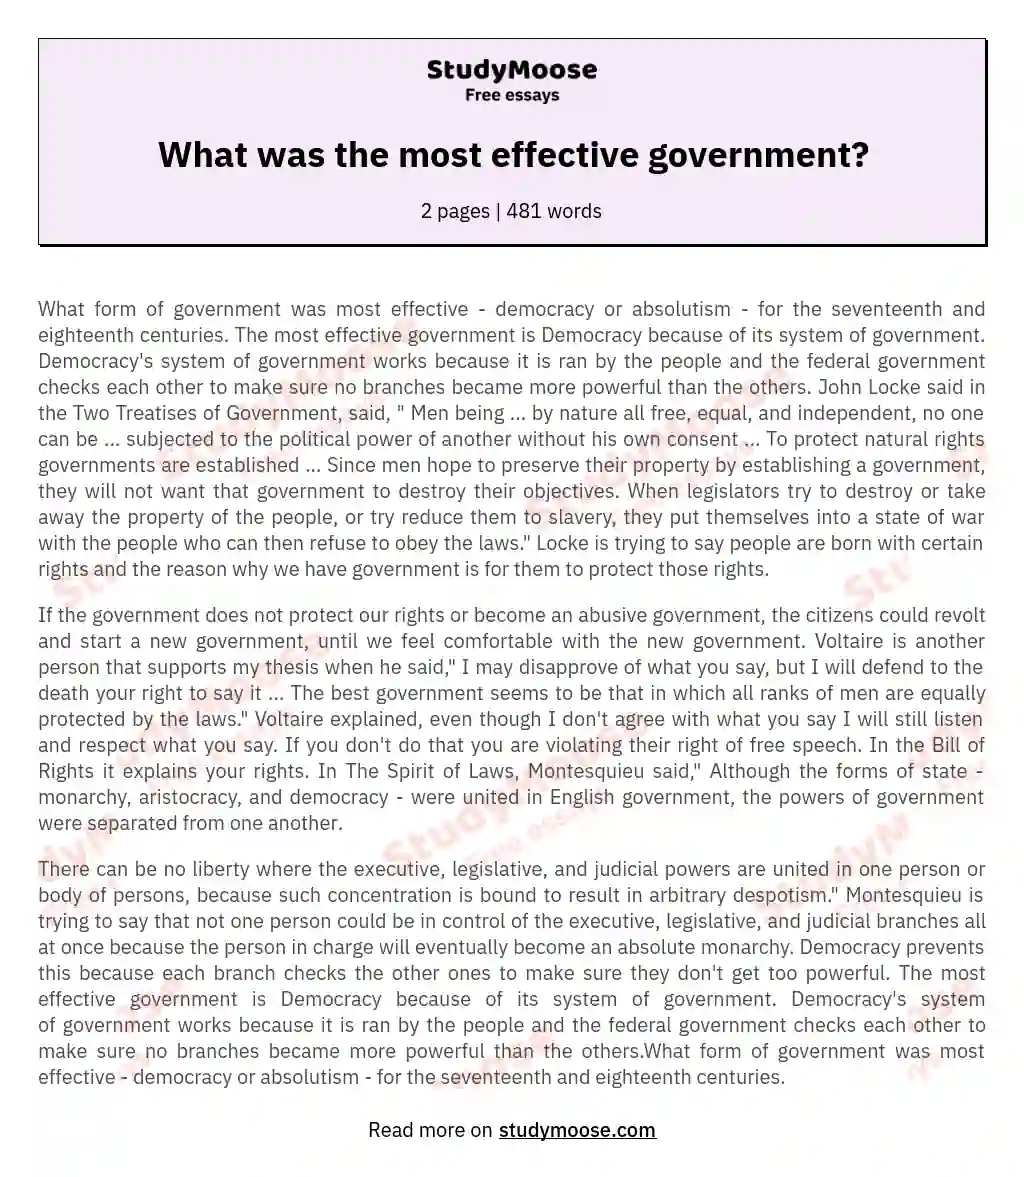 What was the most effective government?